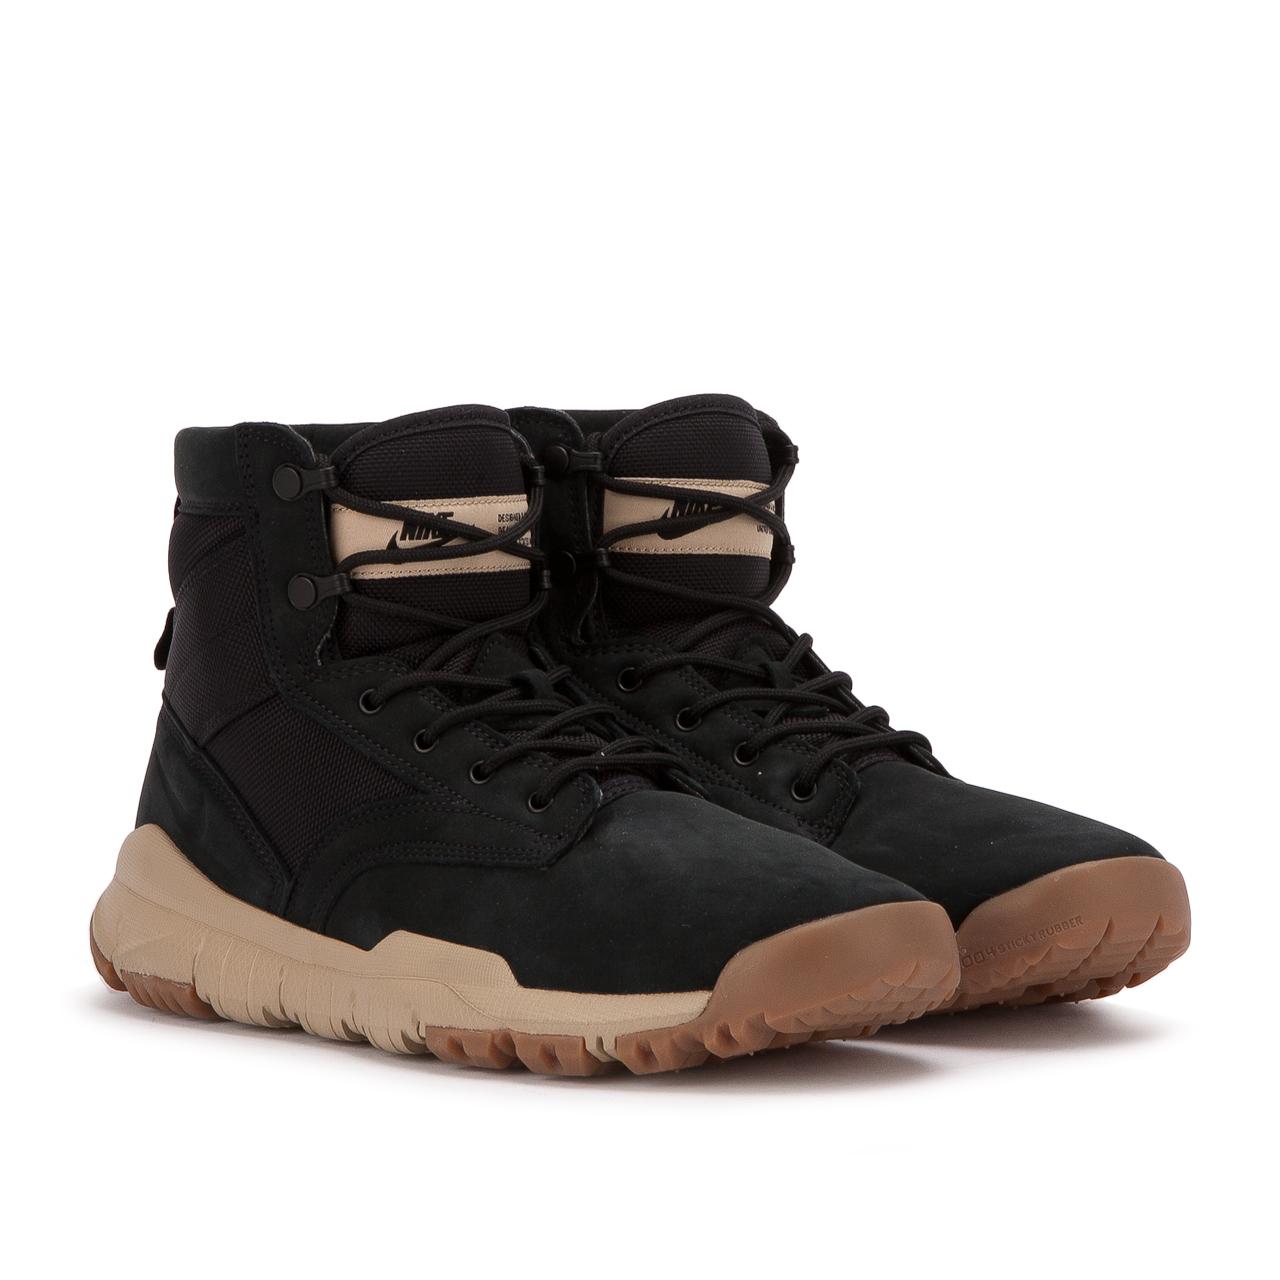 Nike Nike Sfb 6" Nsw Leather Boot in Black for Men - Lyst